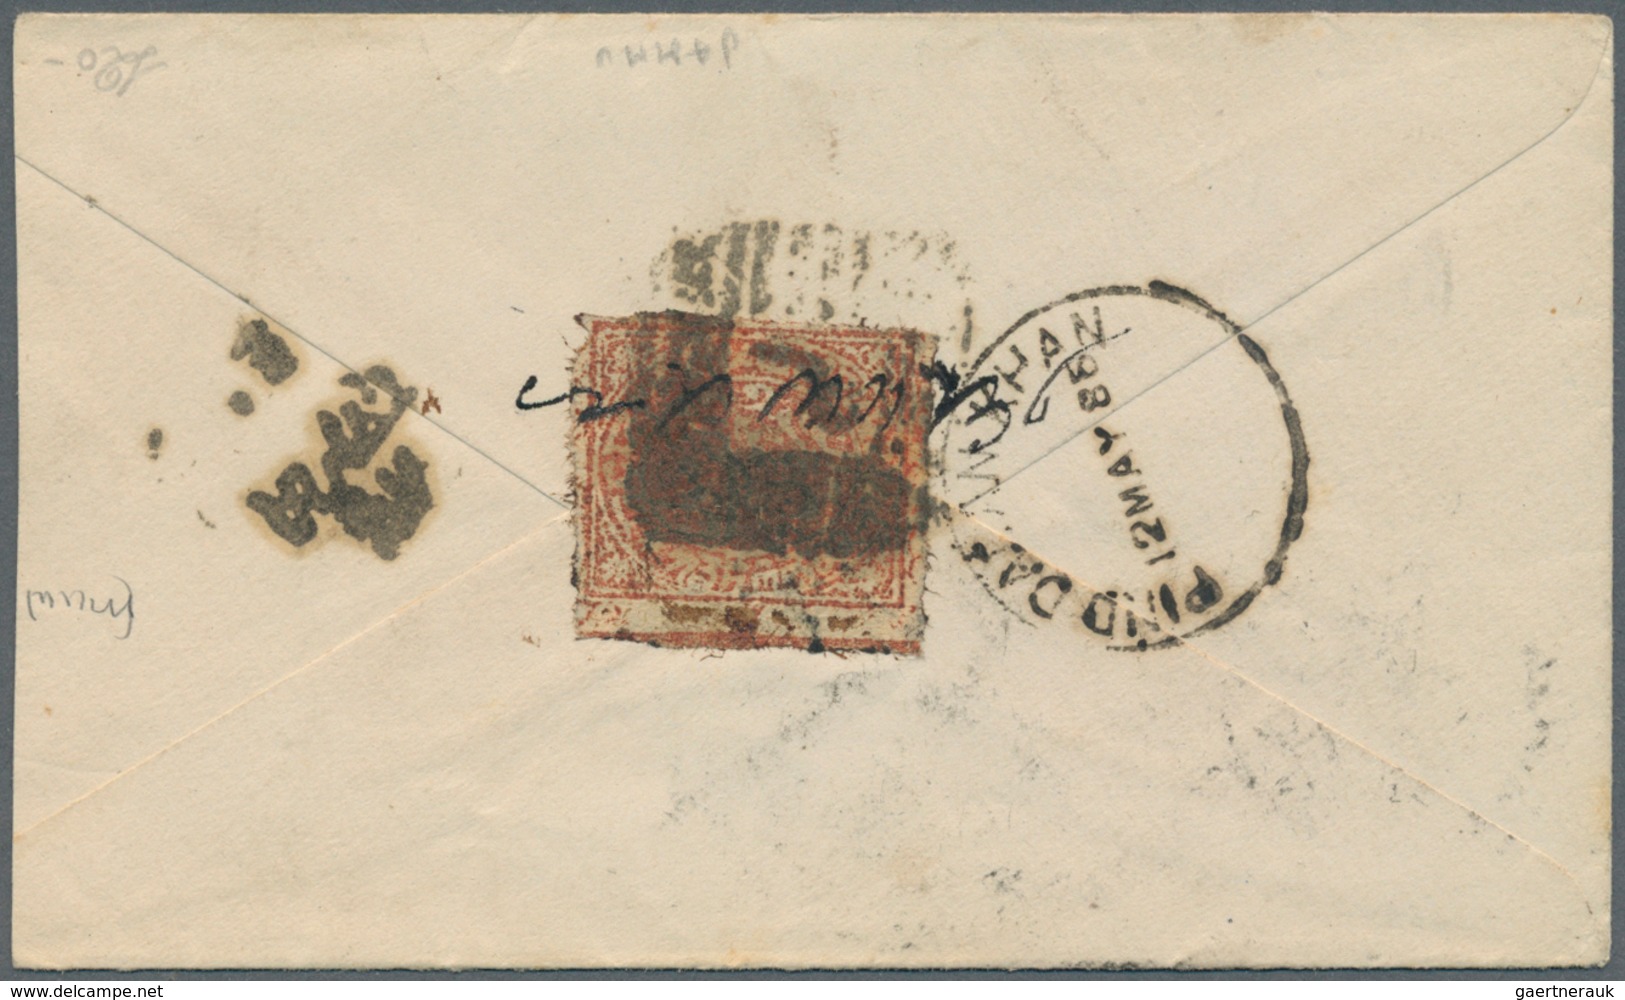 Indien: 1880's/1950's ca.: Accumulation of about 170 covers, postcards and postal stationery from In